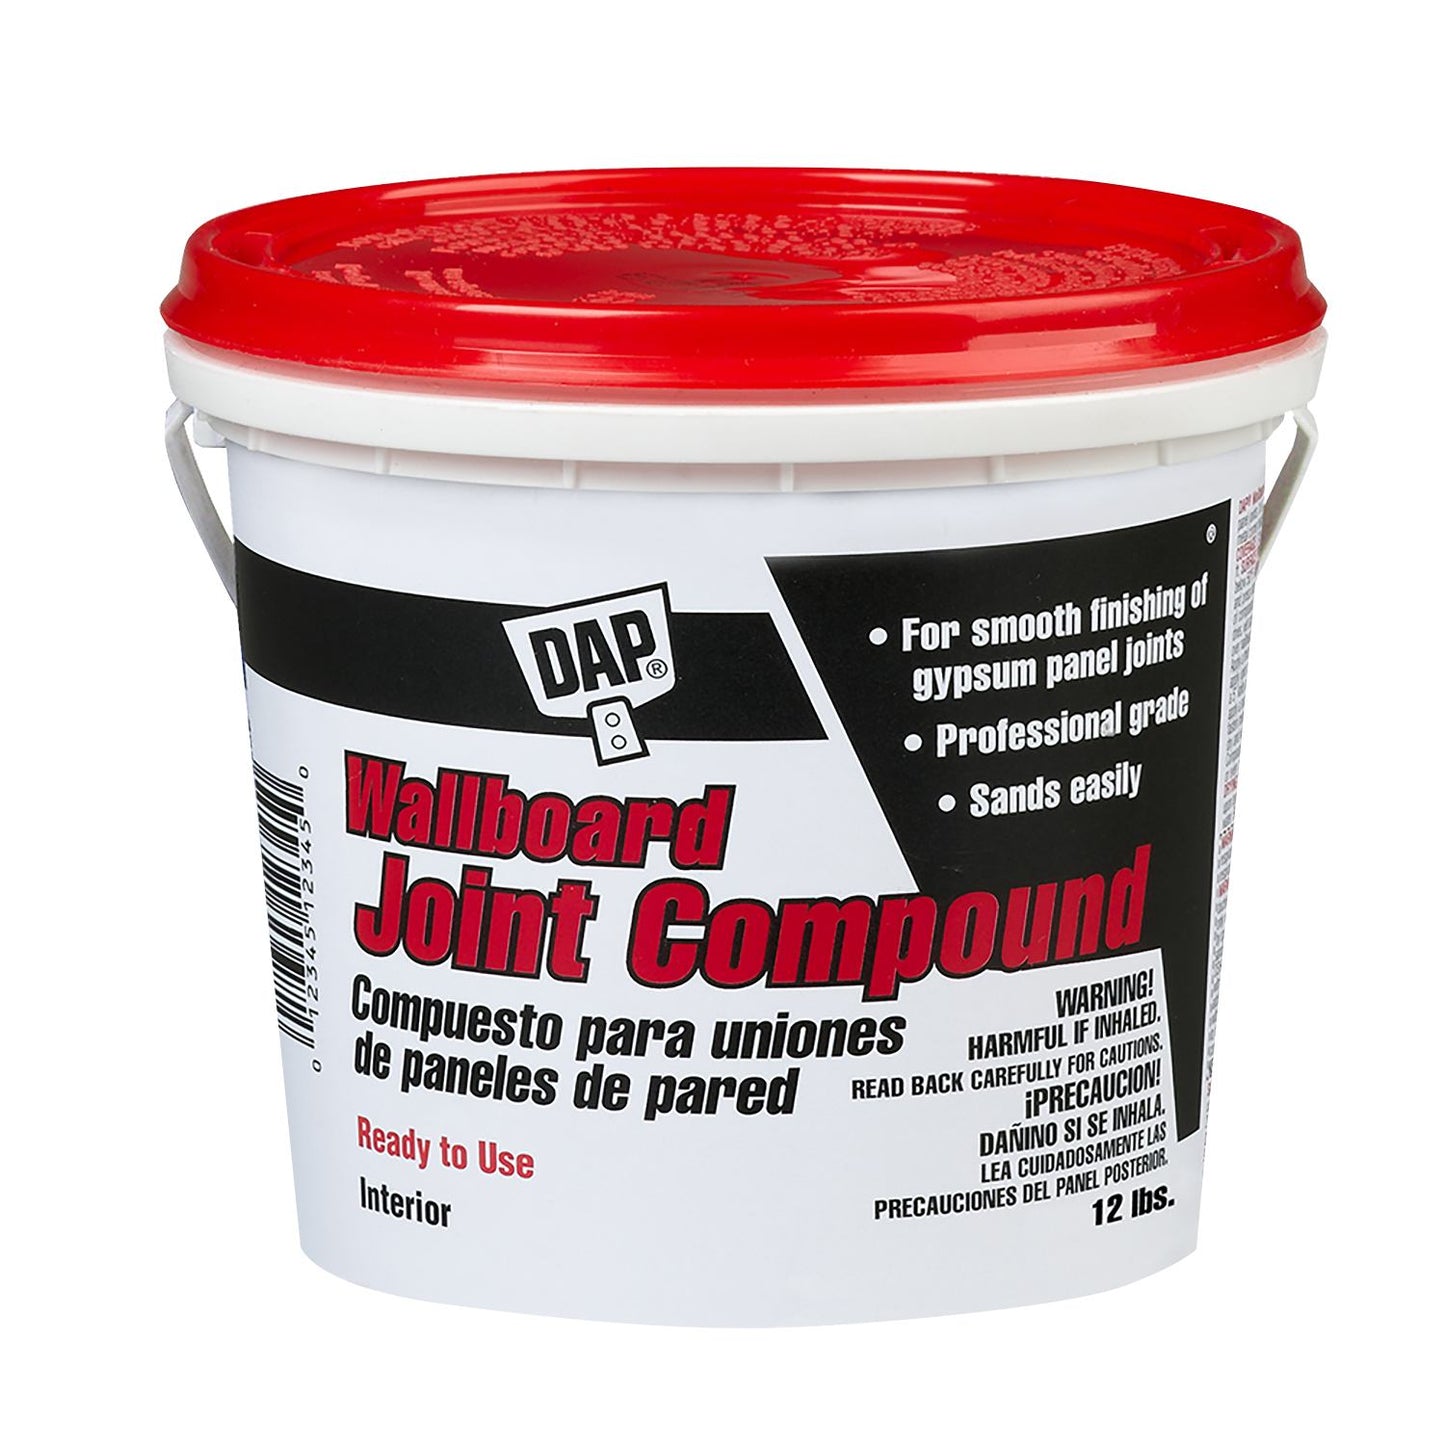 Dap Wallboard Joint Compound Large (5.5kg)